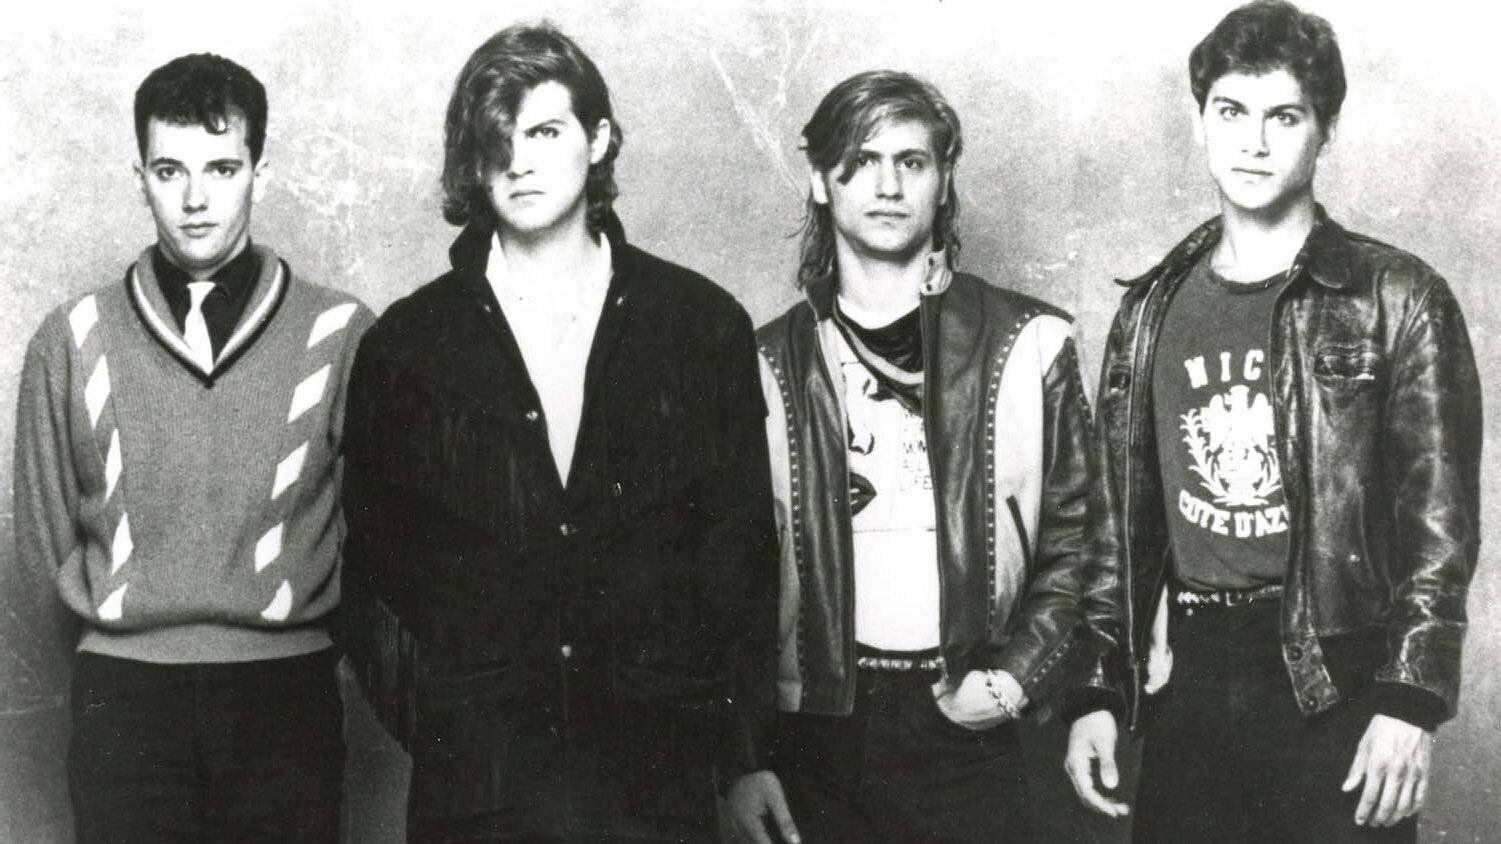 A dance party comeback for Men Without Hats - The Globe and Mail